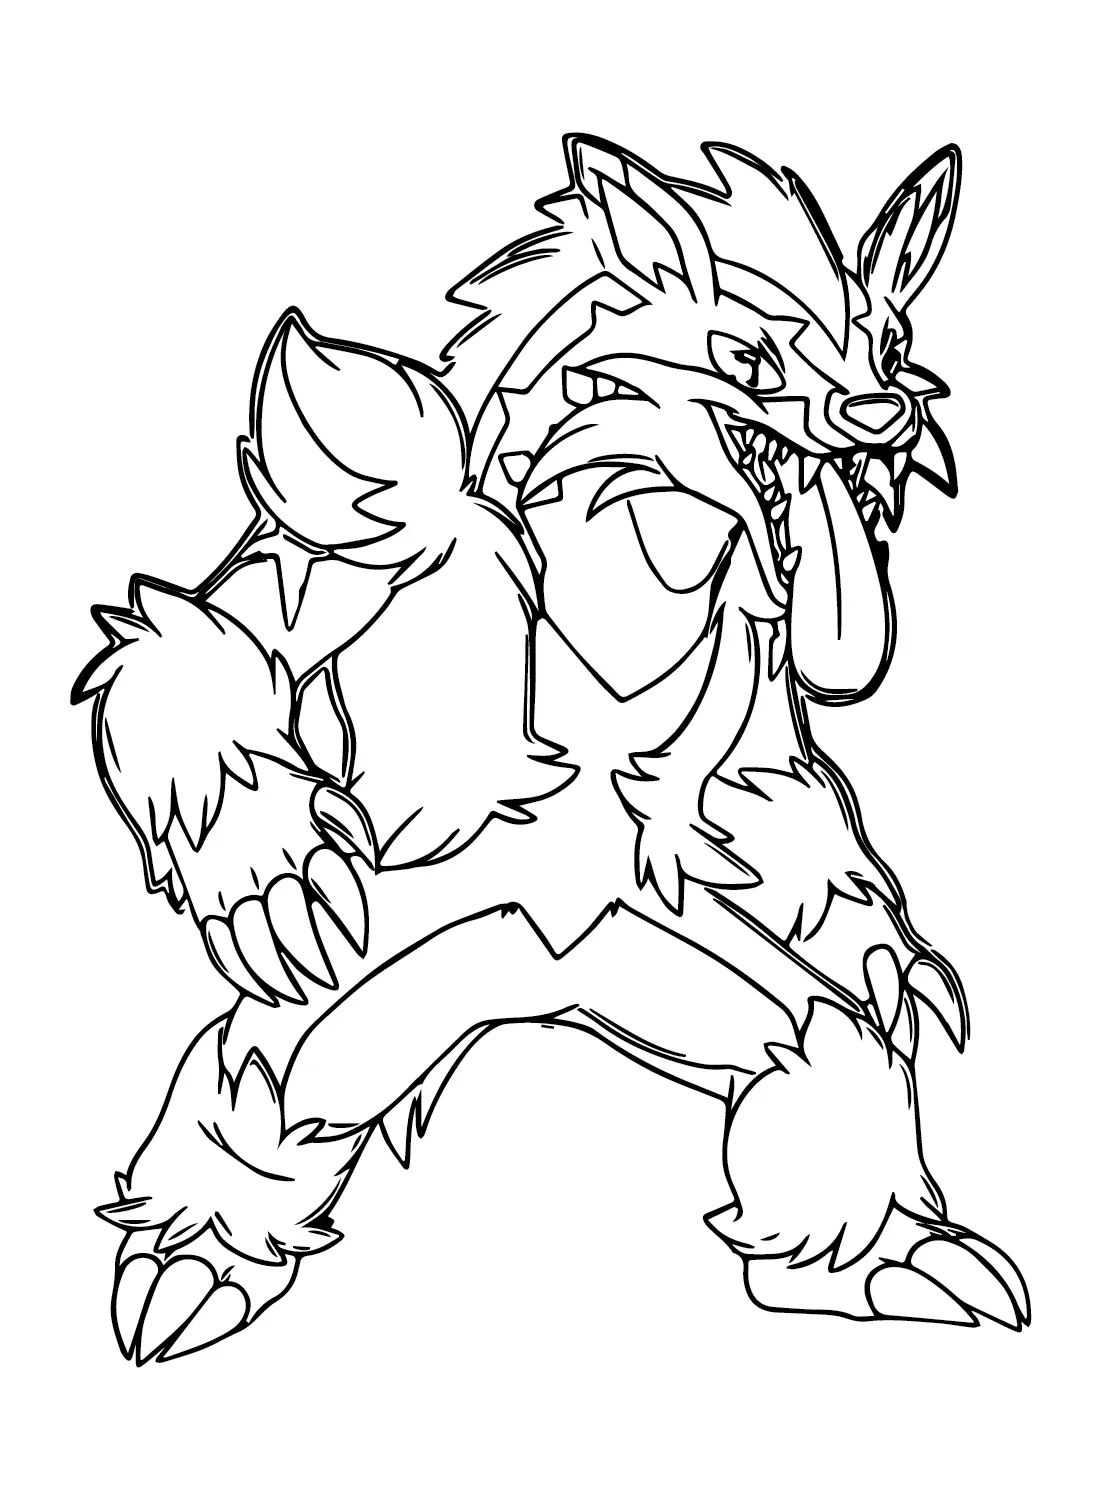 Obstagoon Coloring Pages